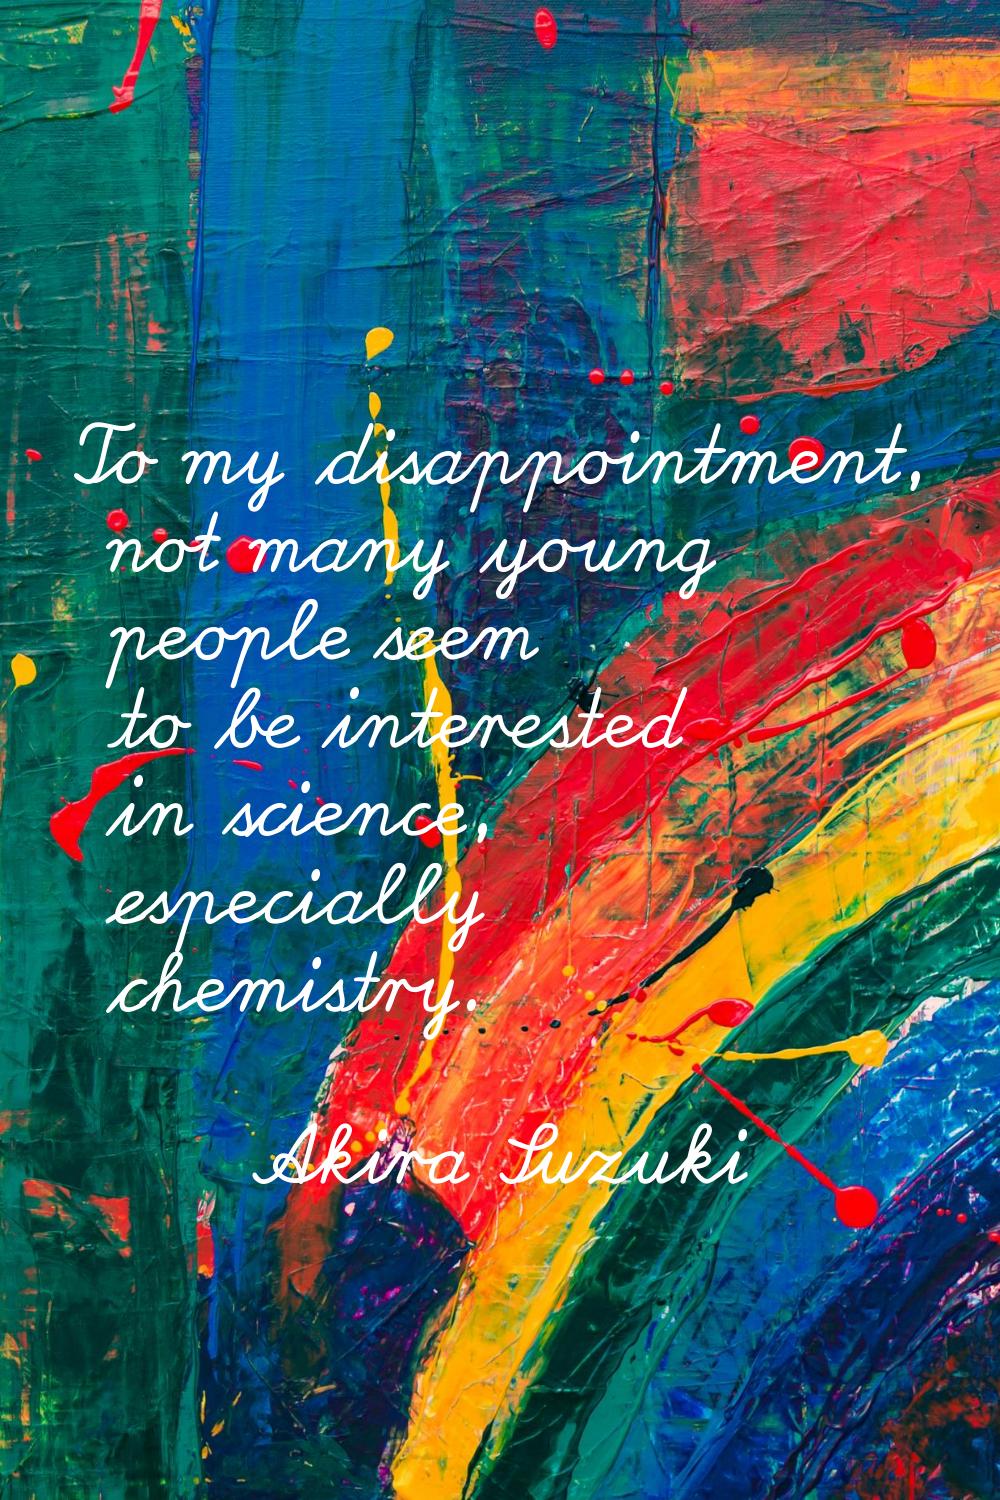 To my disappointment, not many young people seem to be interested in science, especially chemistry.